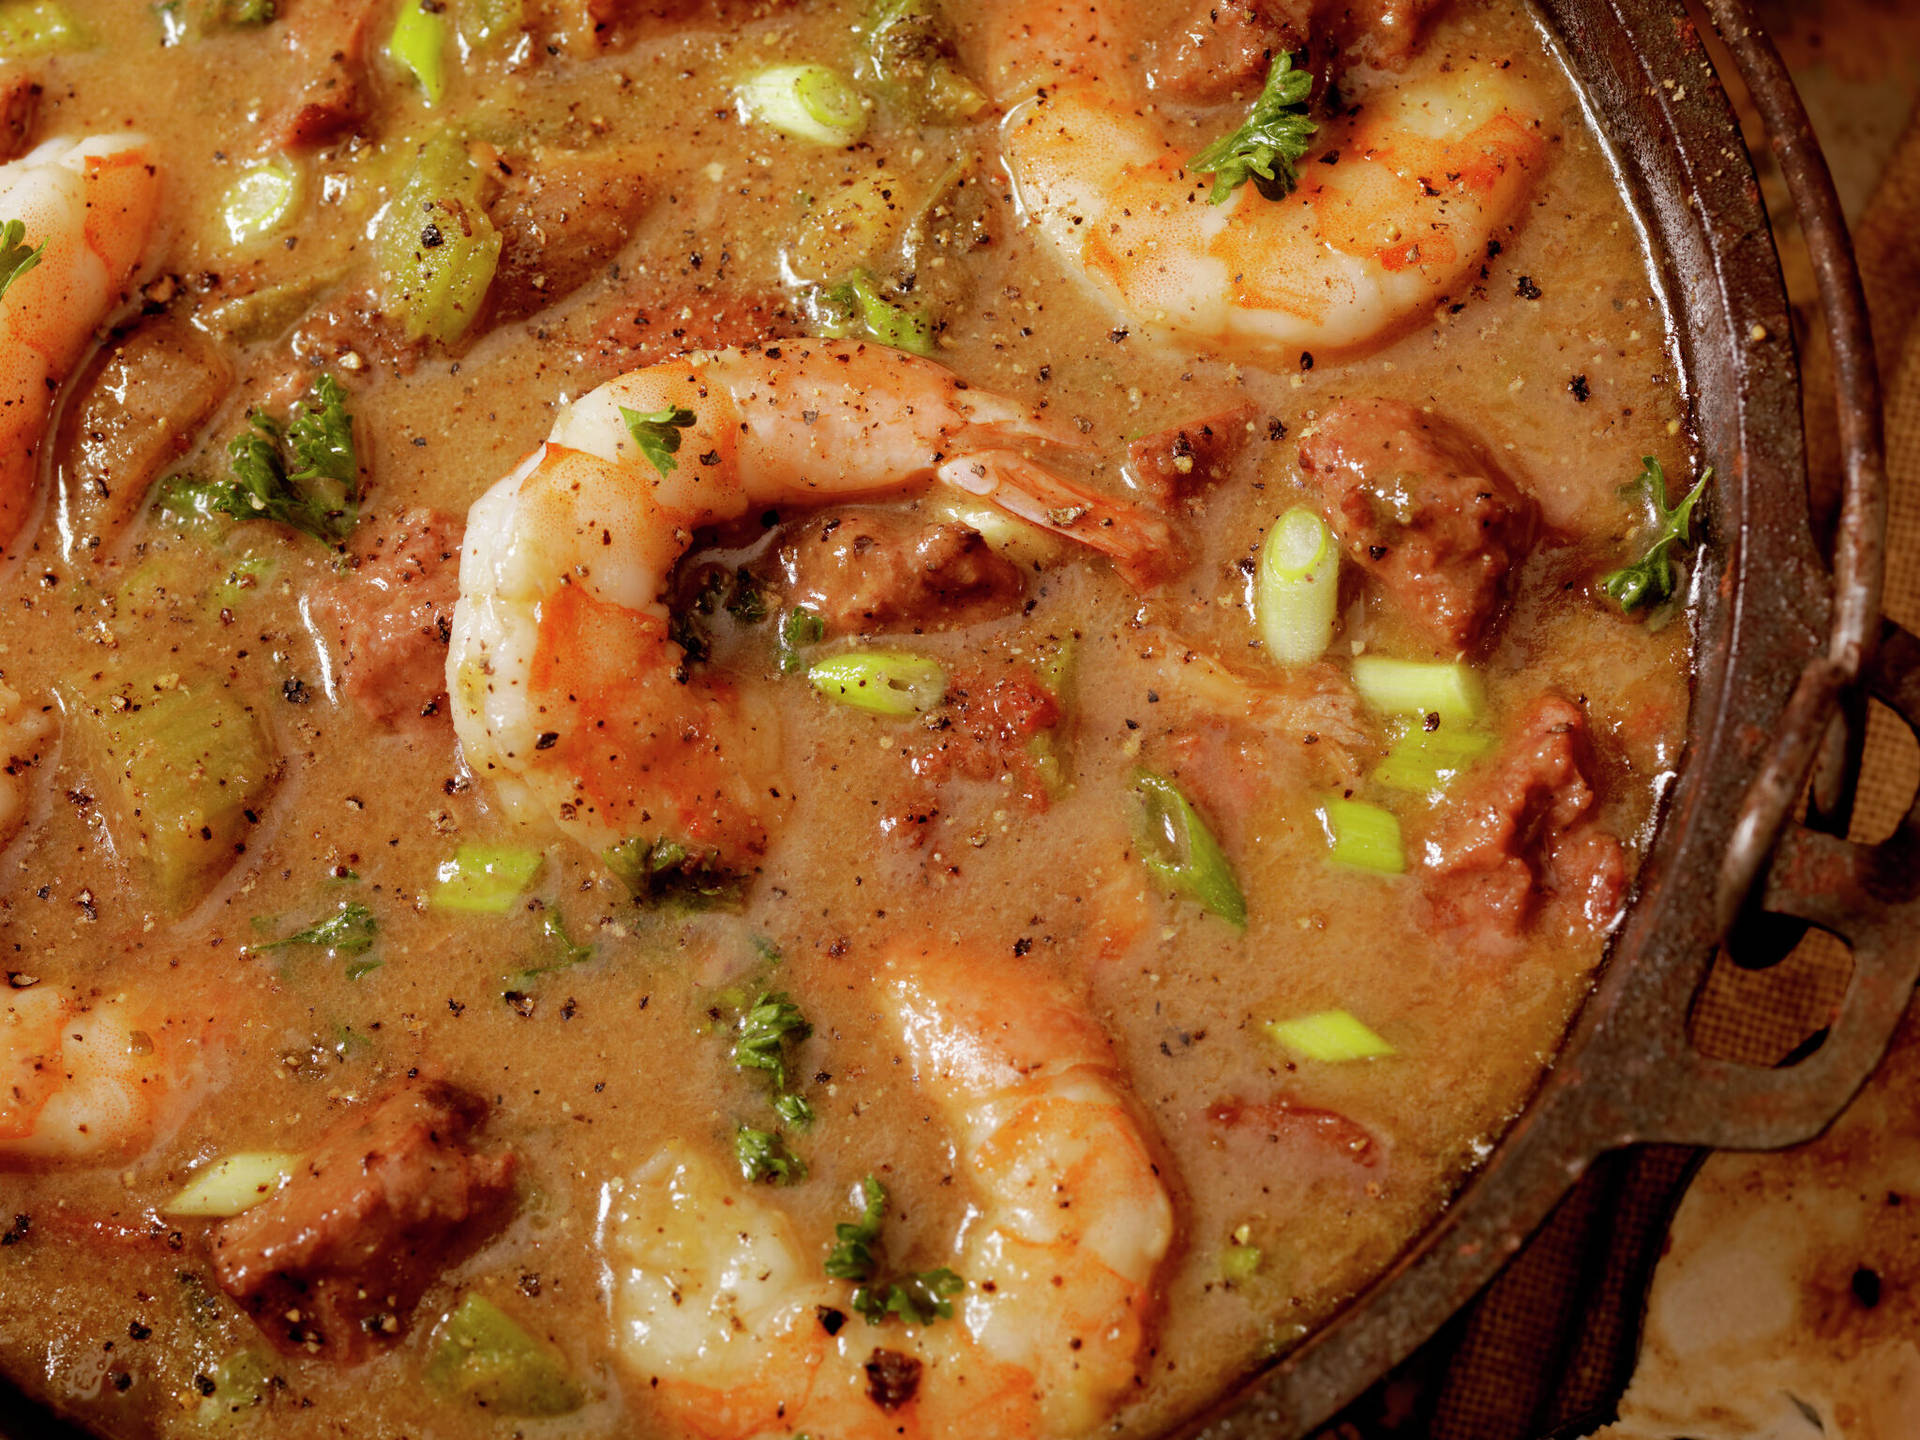 Delicious Gumbo with Shrimp in a Bowl Wallpaper